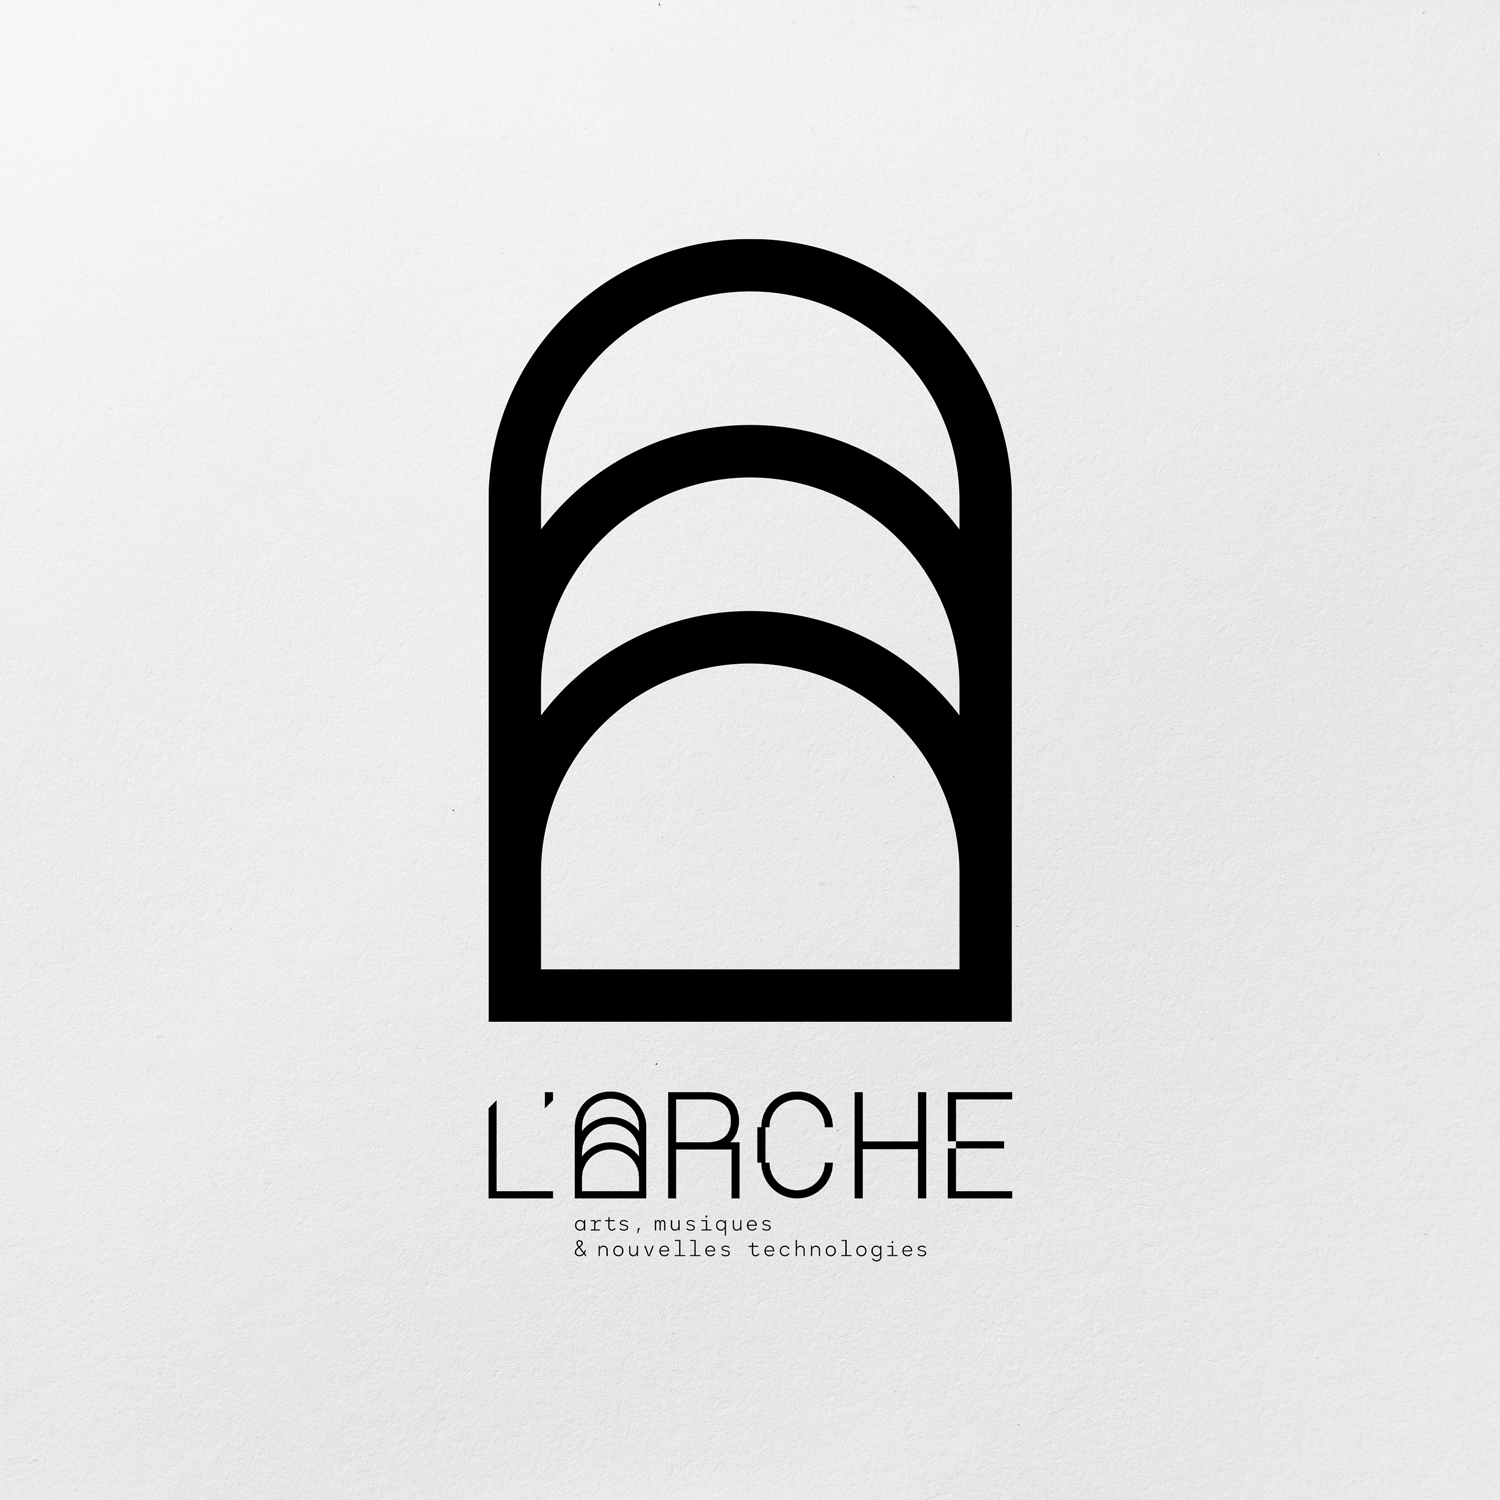 L’Arche Logotype and Typography Created by Buckwild